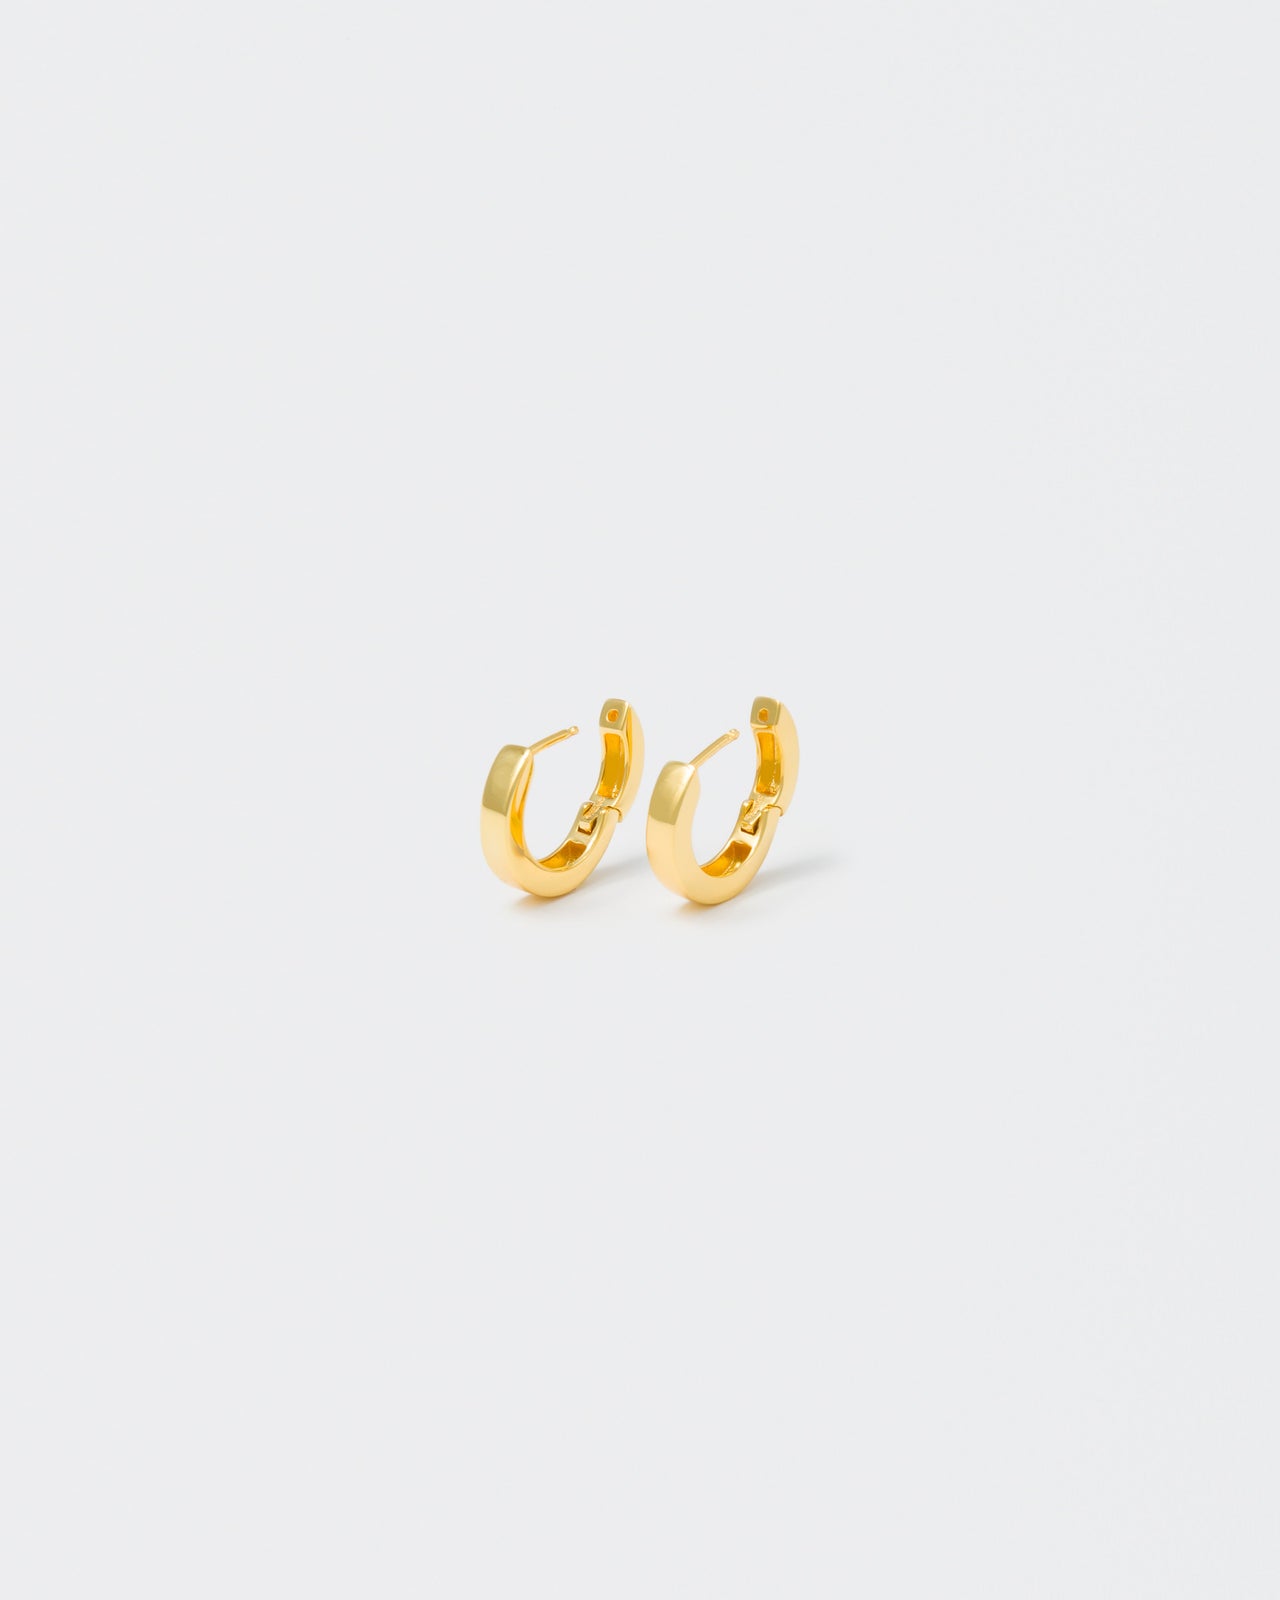 18k yellow gold coated hoop earrings with lasered logo and details on the inside